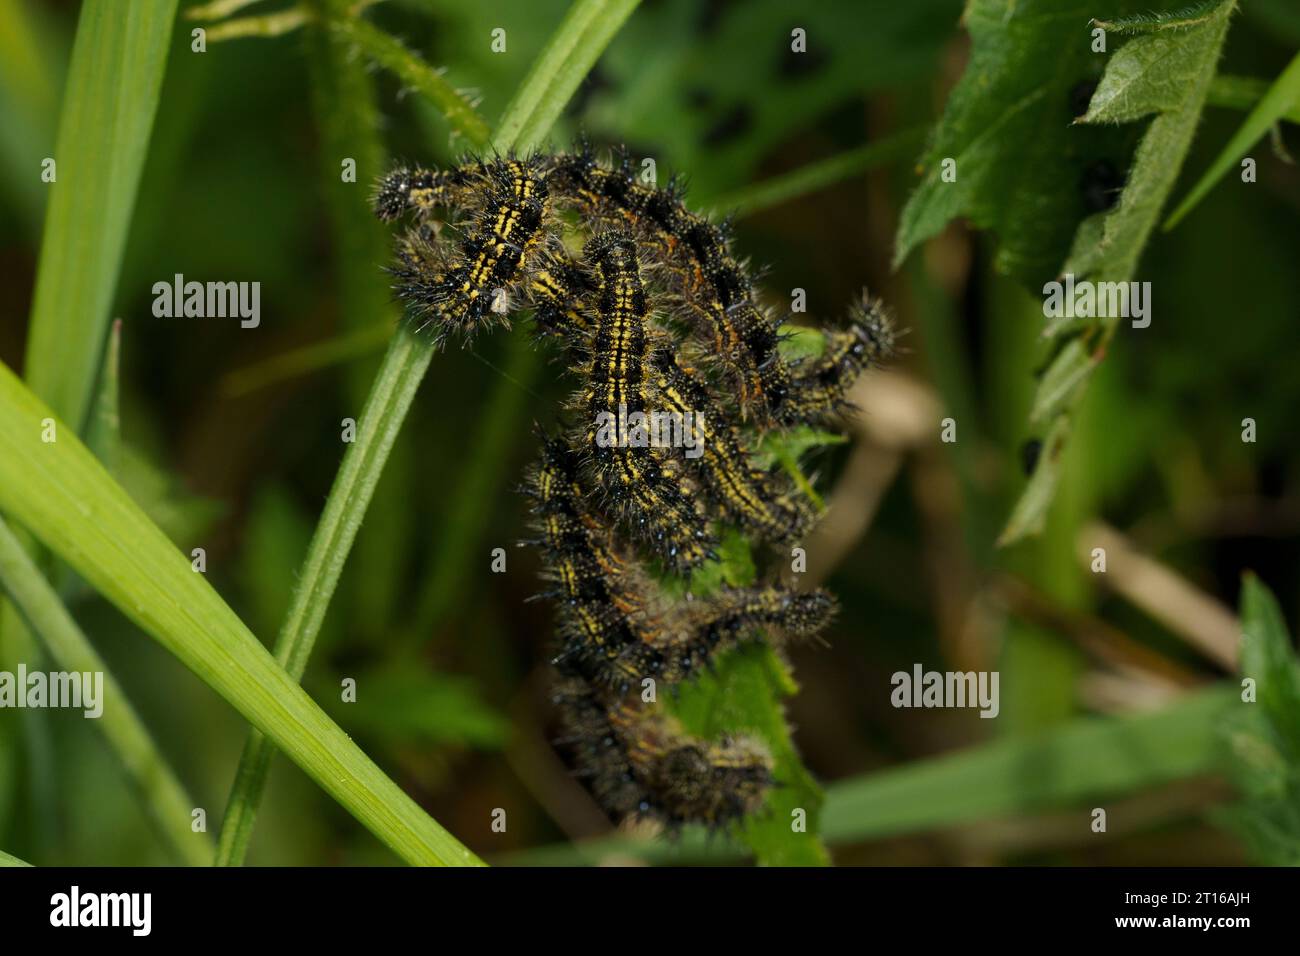 Aglais urticae Family Nymphalidae Genus Aglais Small tortoiseshell butterfly caterpillars wild nature insect photography, picture, wallpaper Stock Photo